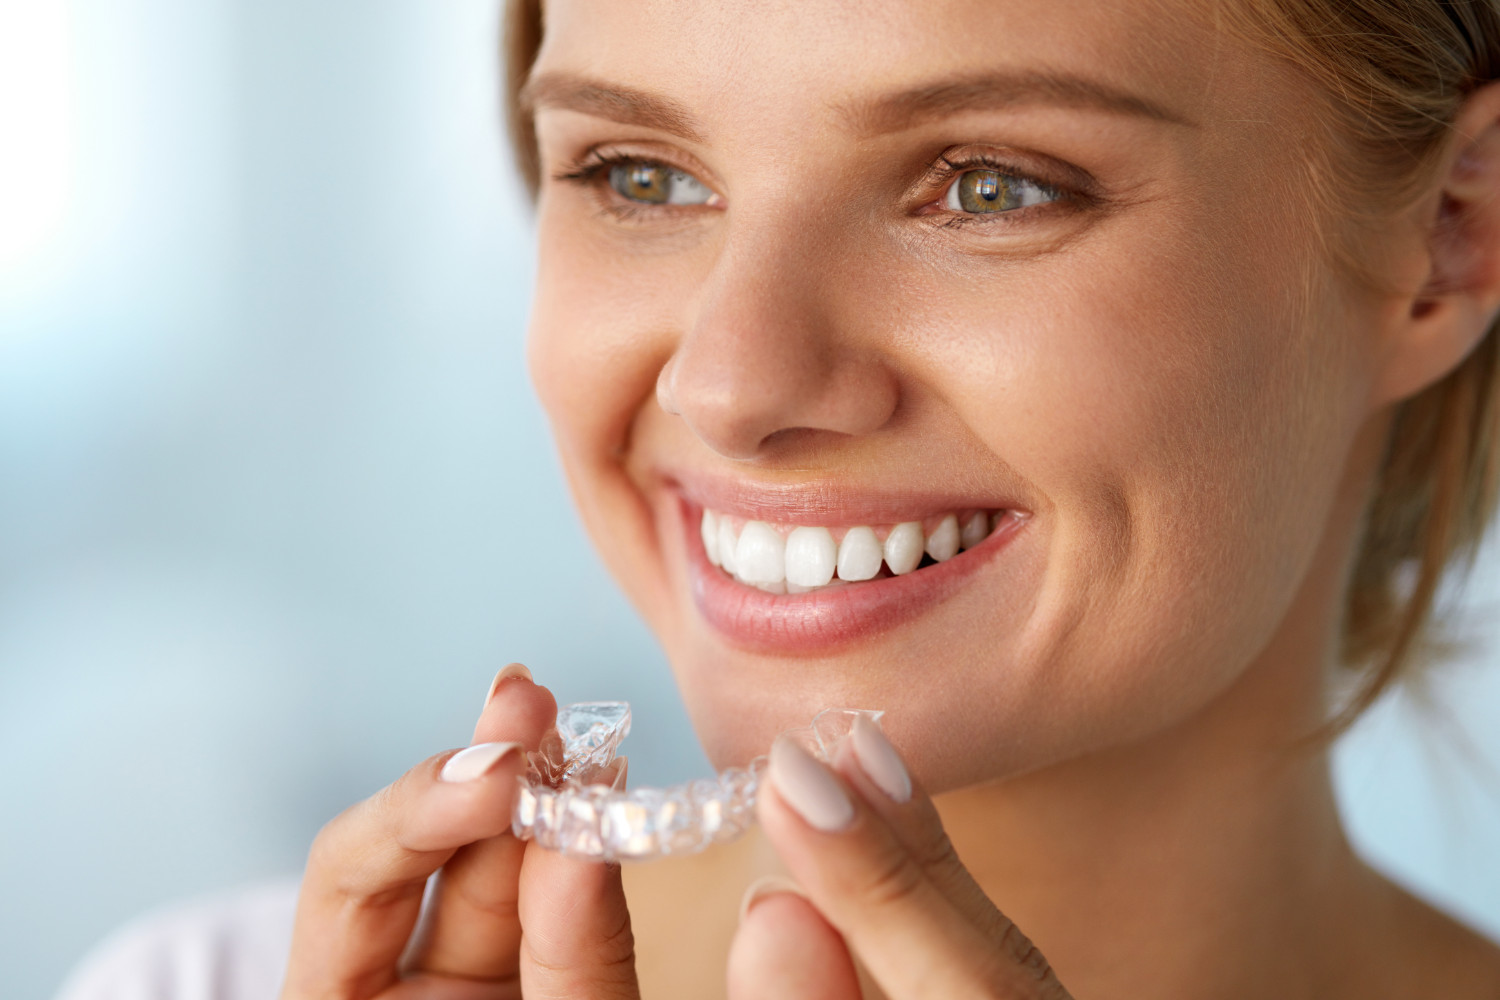 How to Maintain Your Smile After Braces